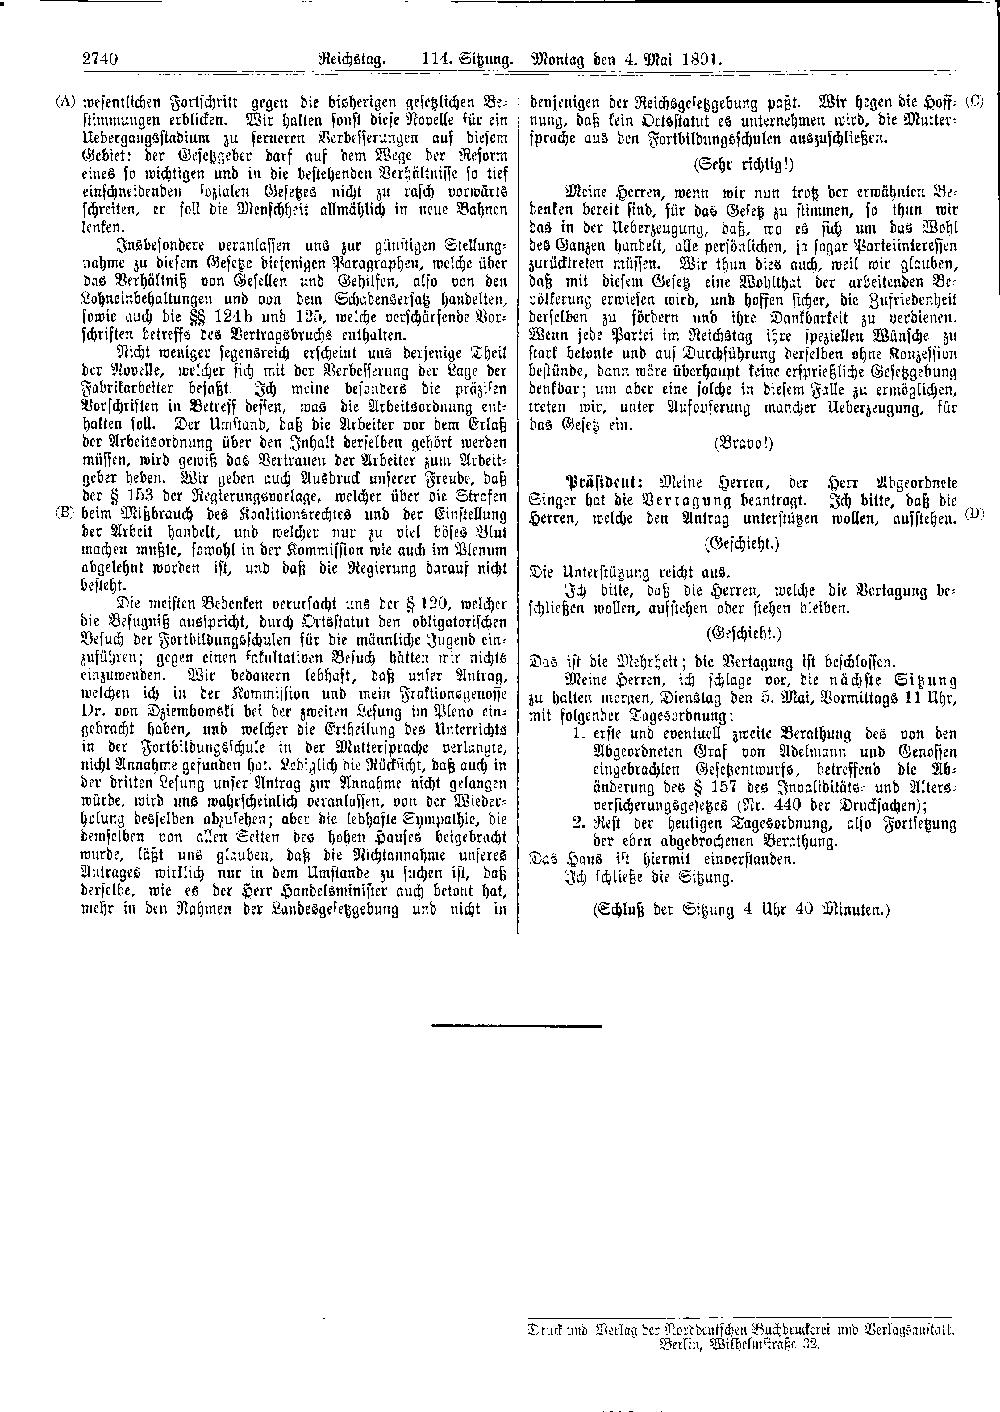 Scan of page 2740